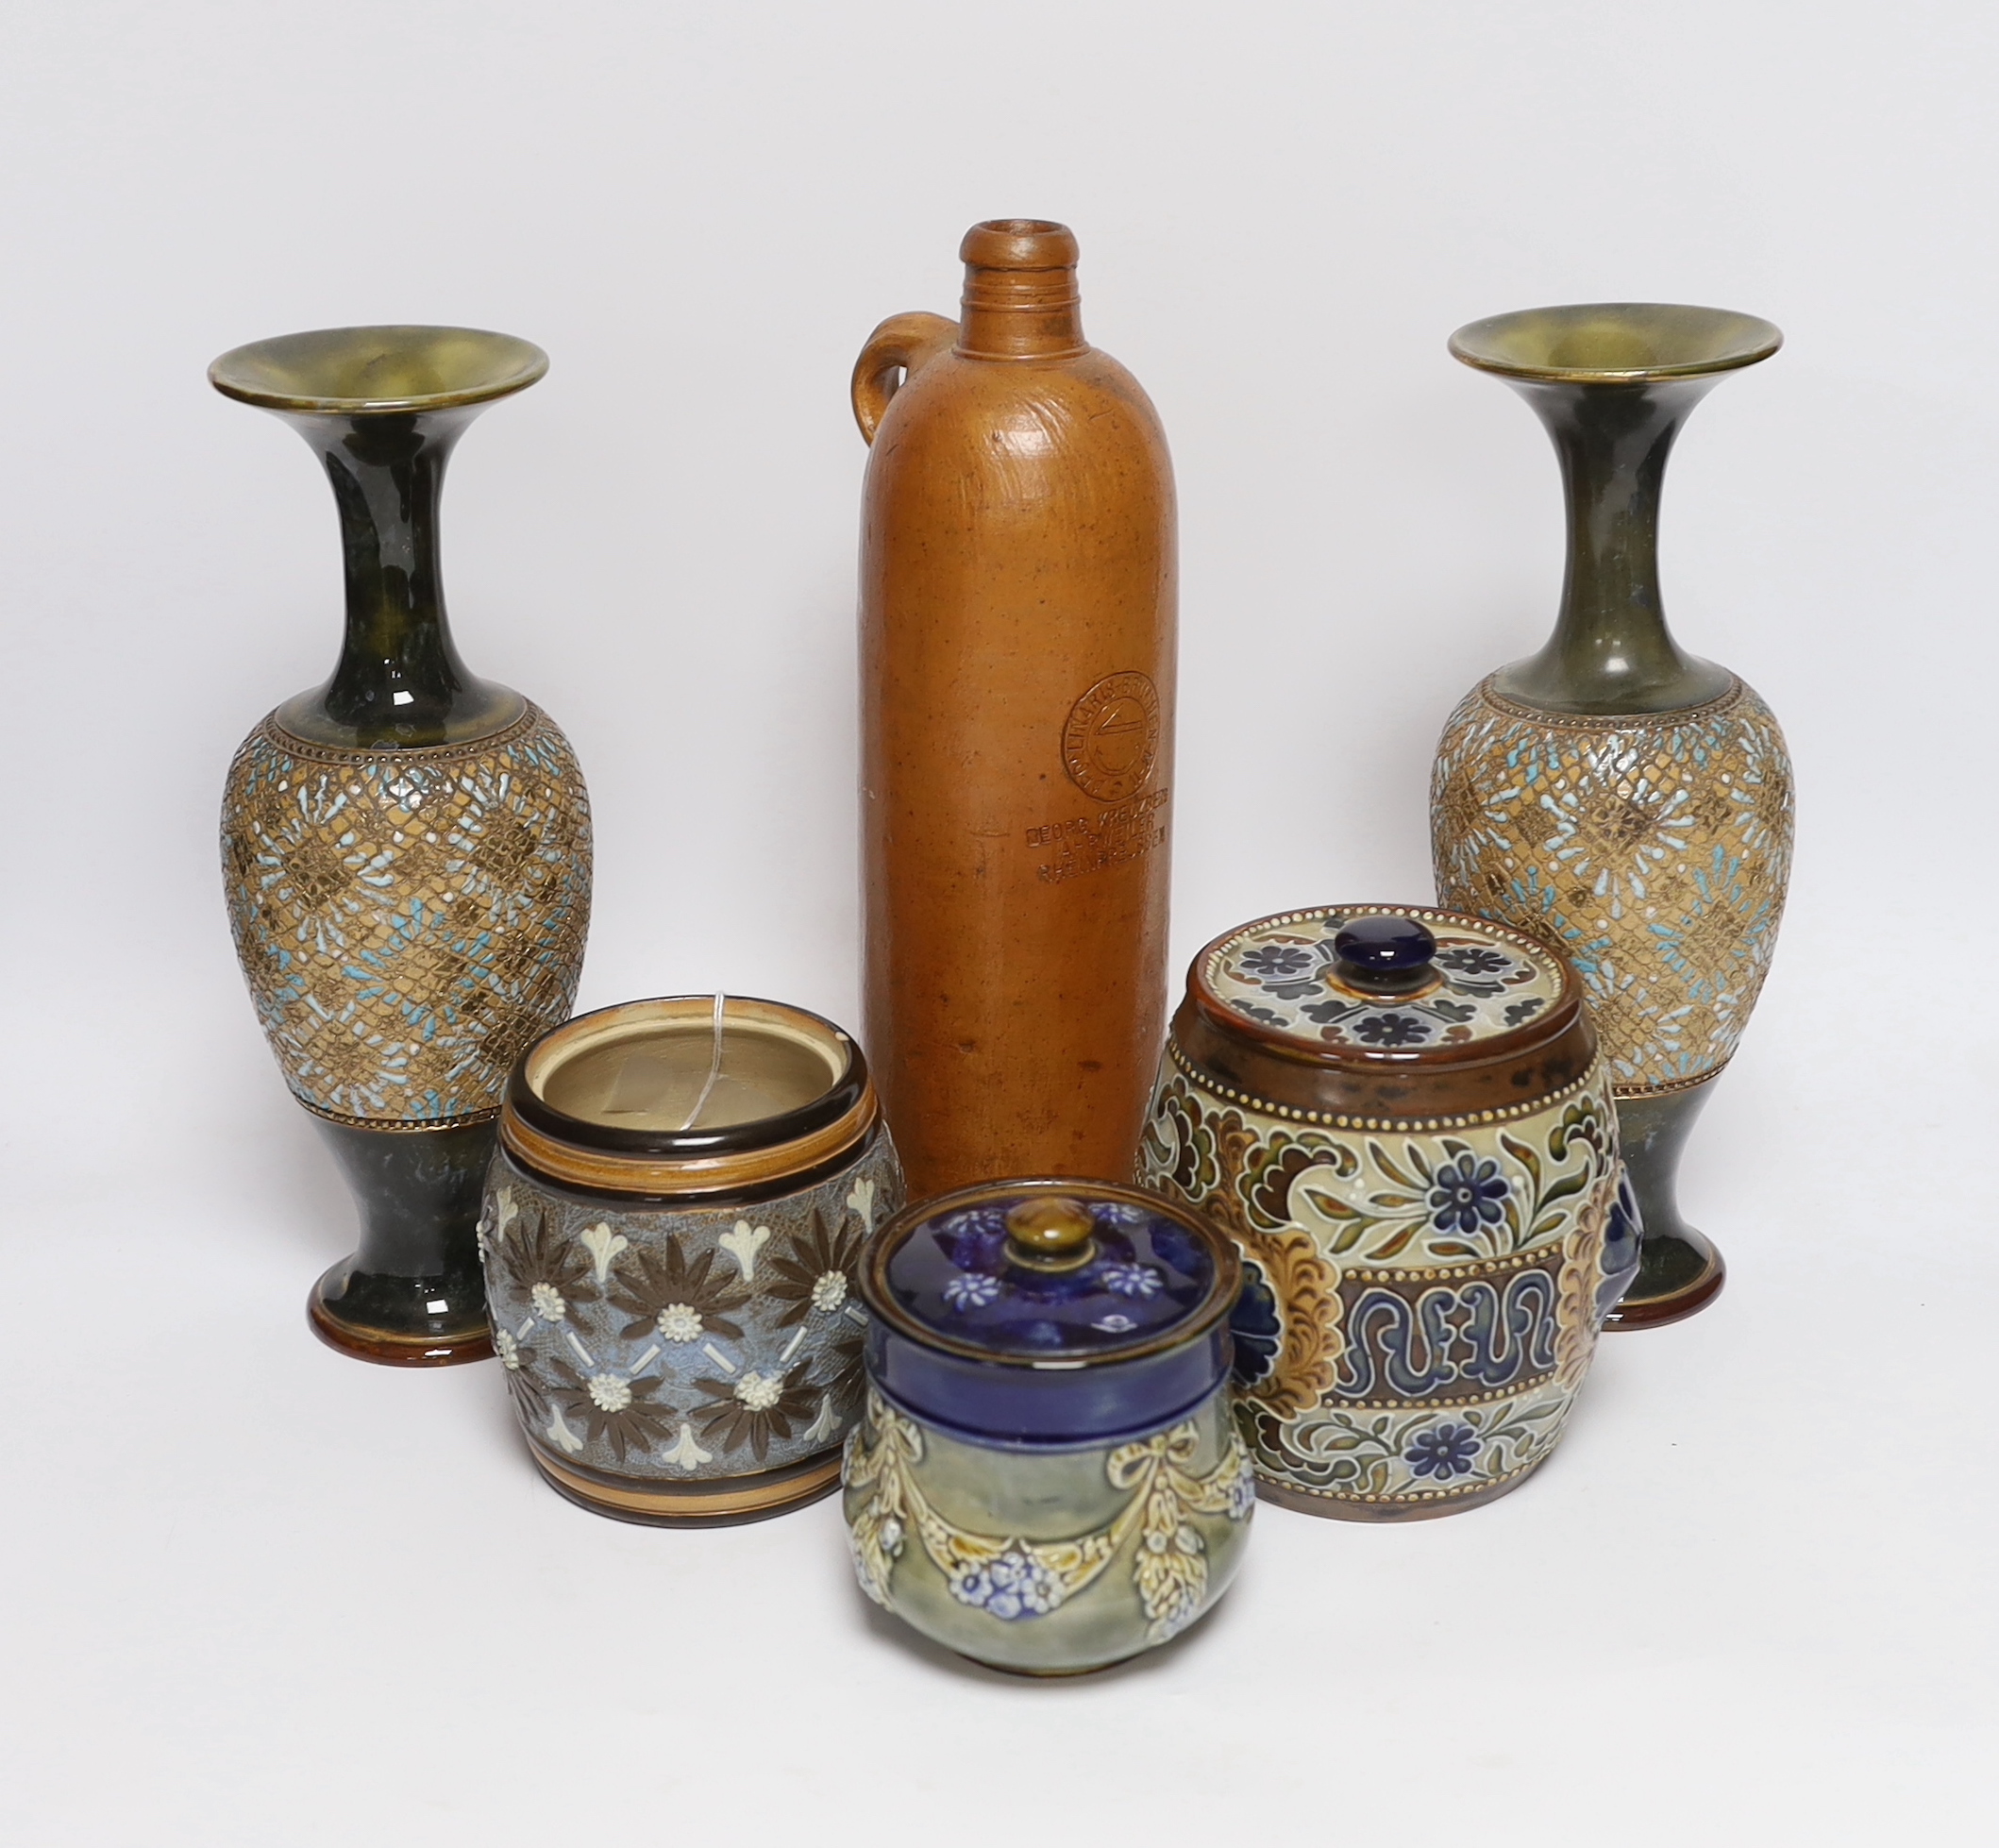 A pair of Doulton Lambeth vases, three jars, two with covers and a Georg Kreuzberg terracotta bottle